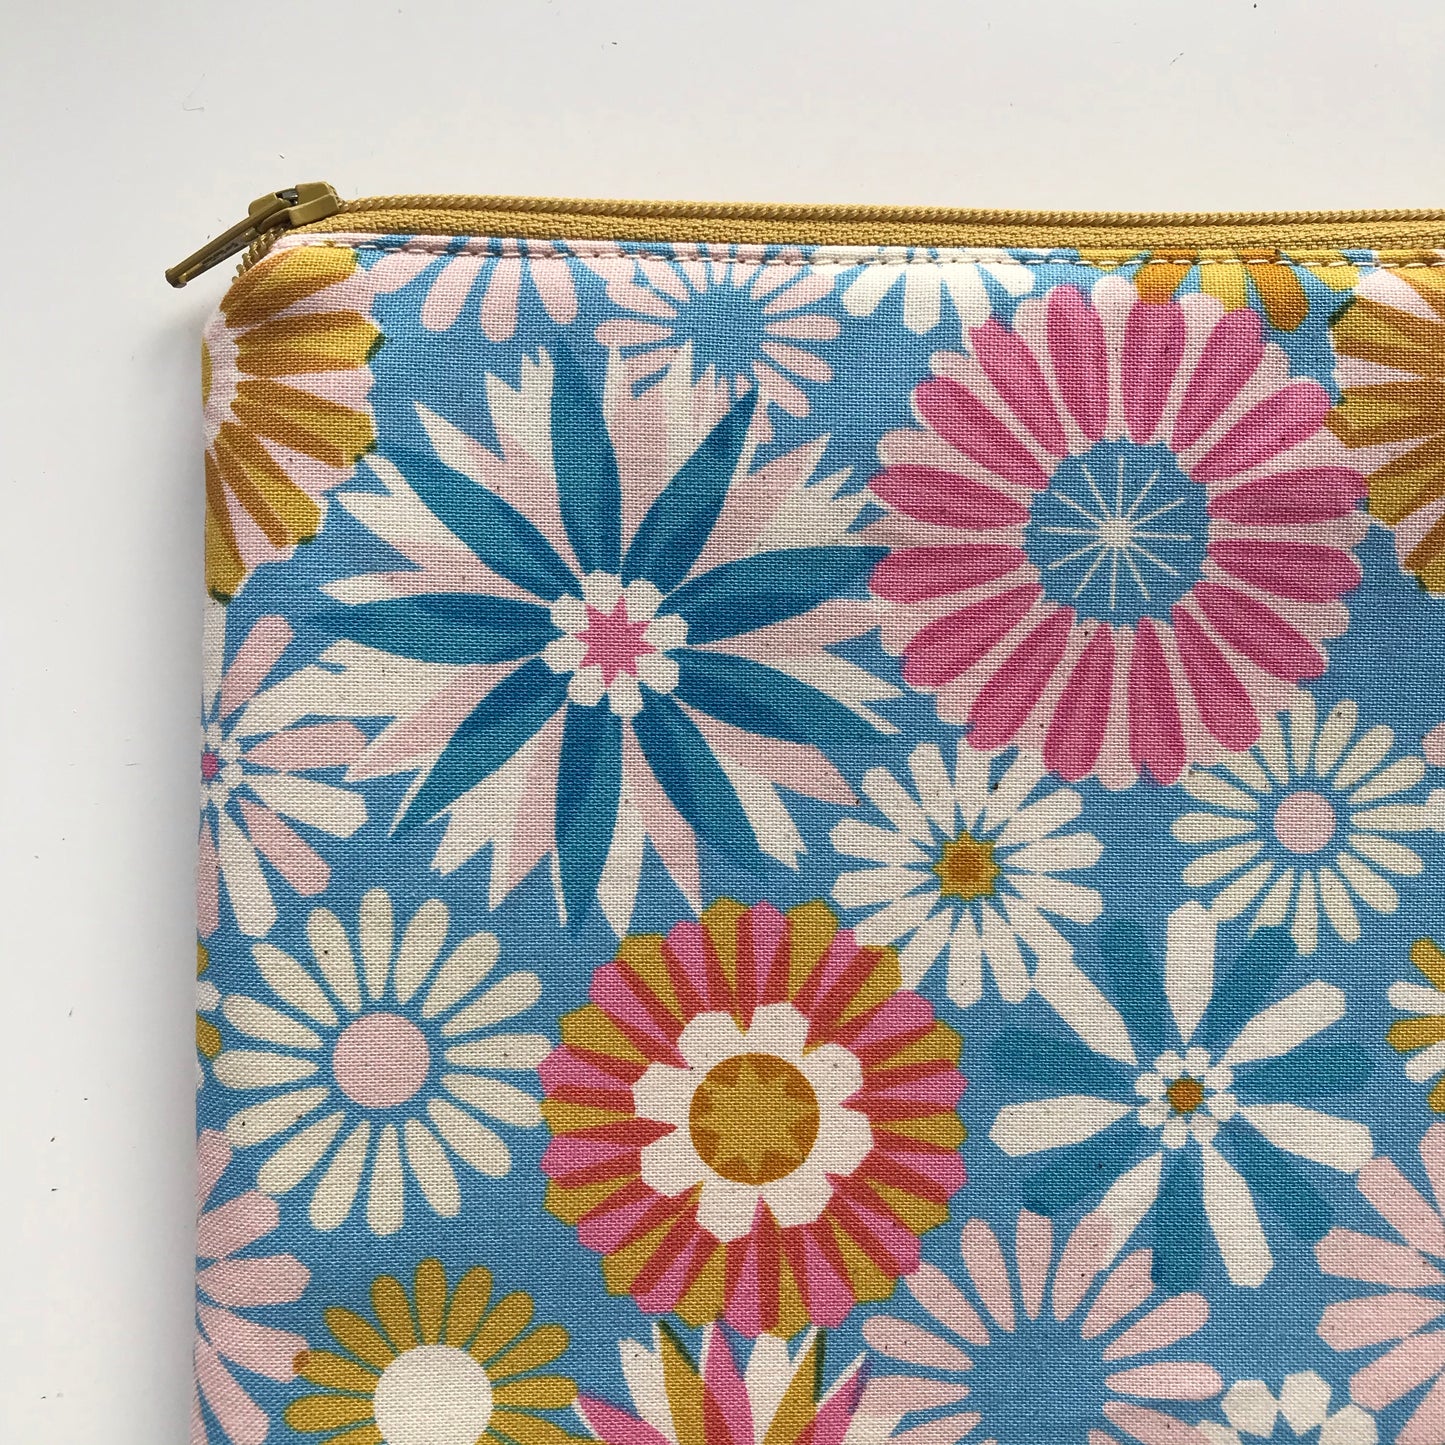 Retro Floral - Small Project Bag